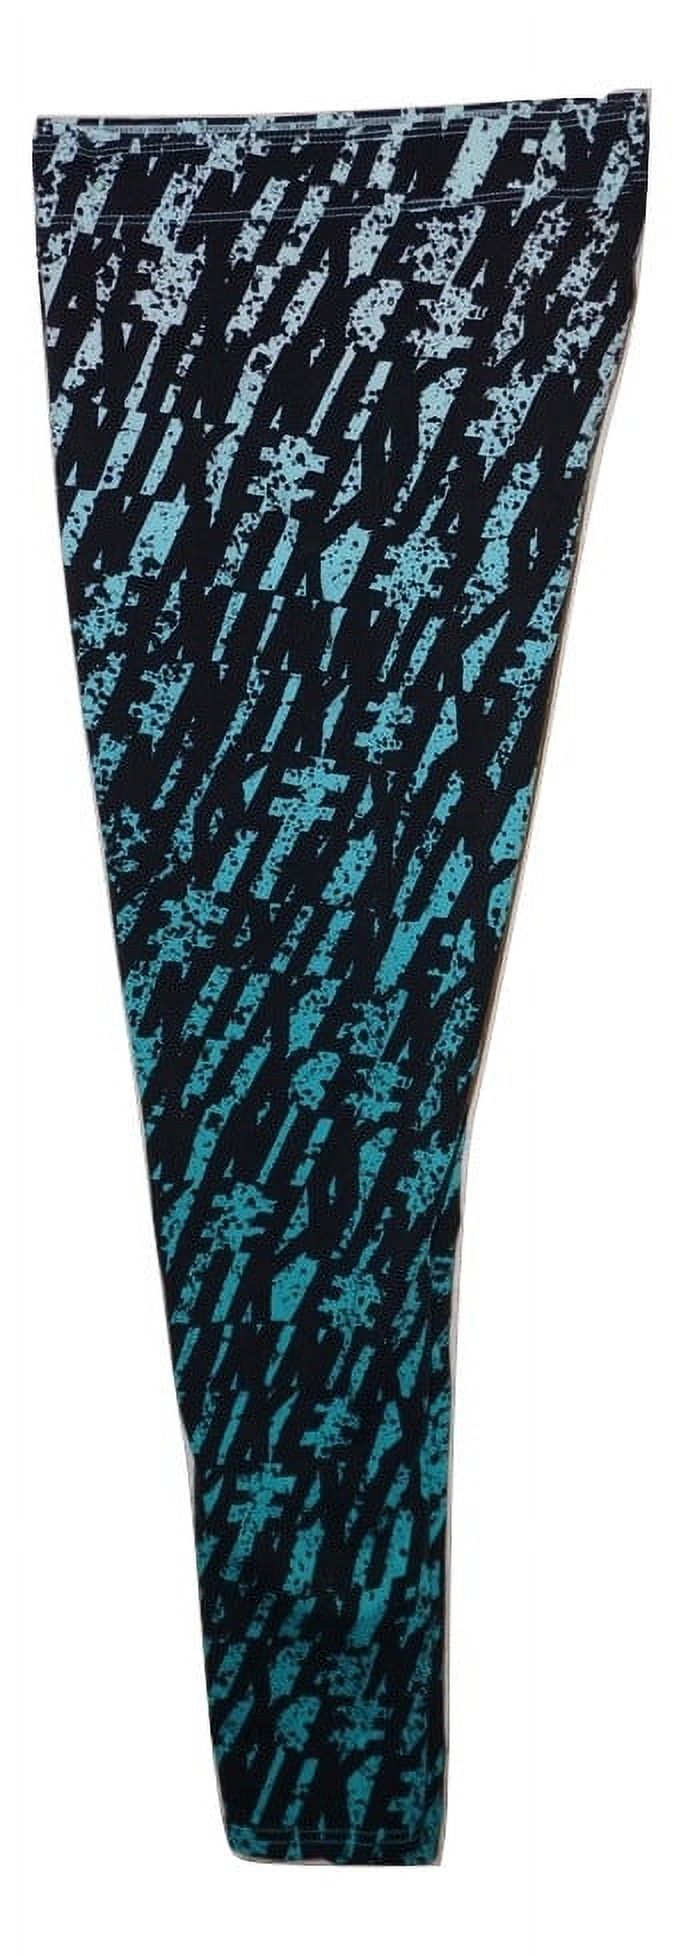 Nike Women's Cotton Club Legging All Over Print Stretch Tights Large - image 2 of 4